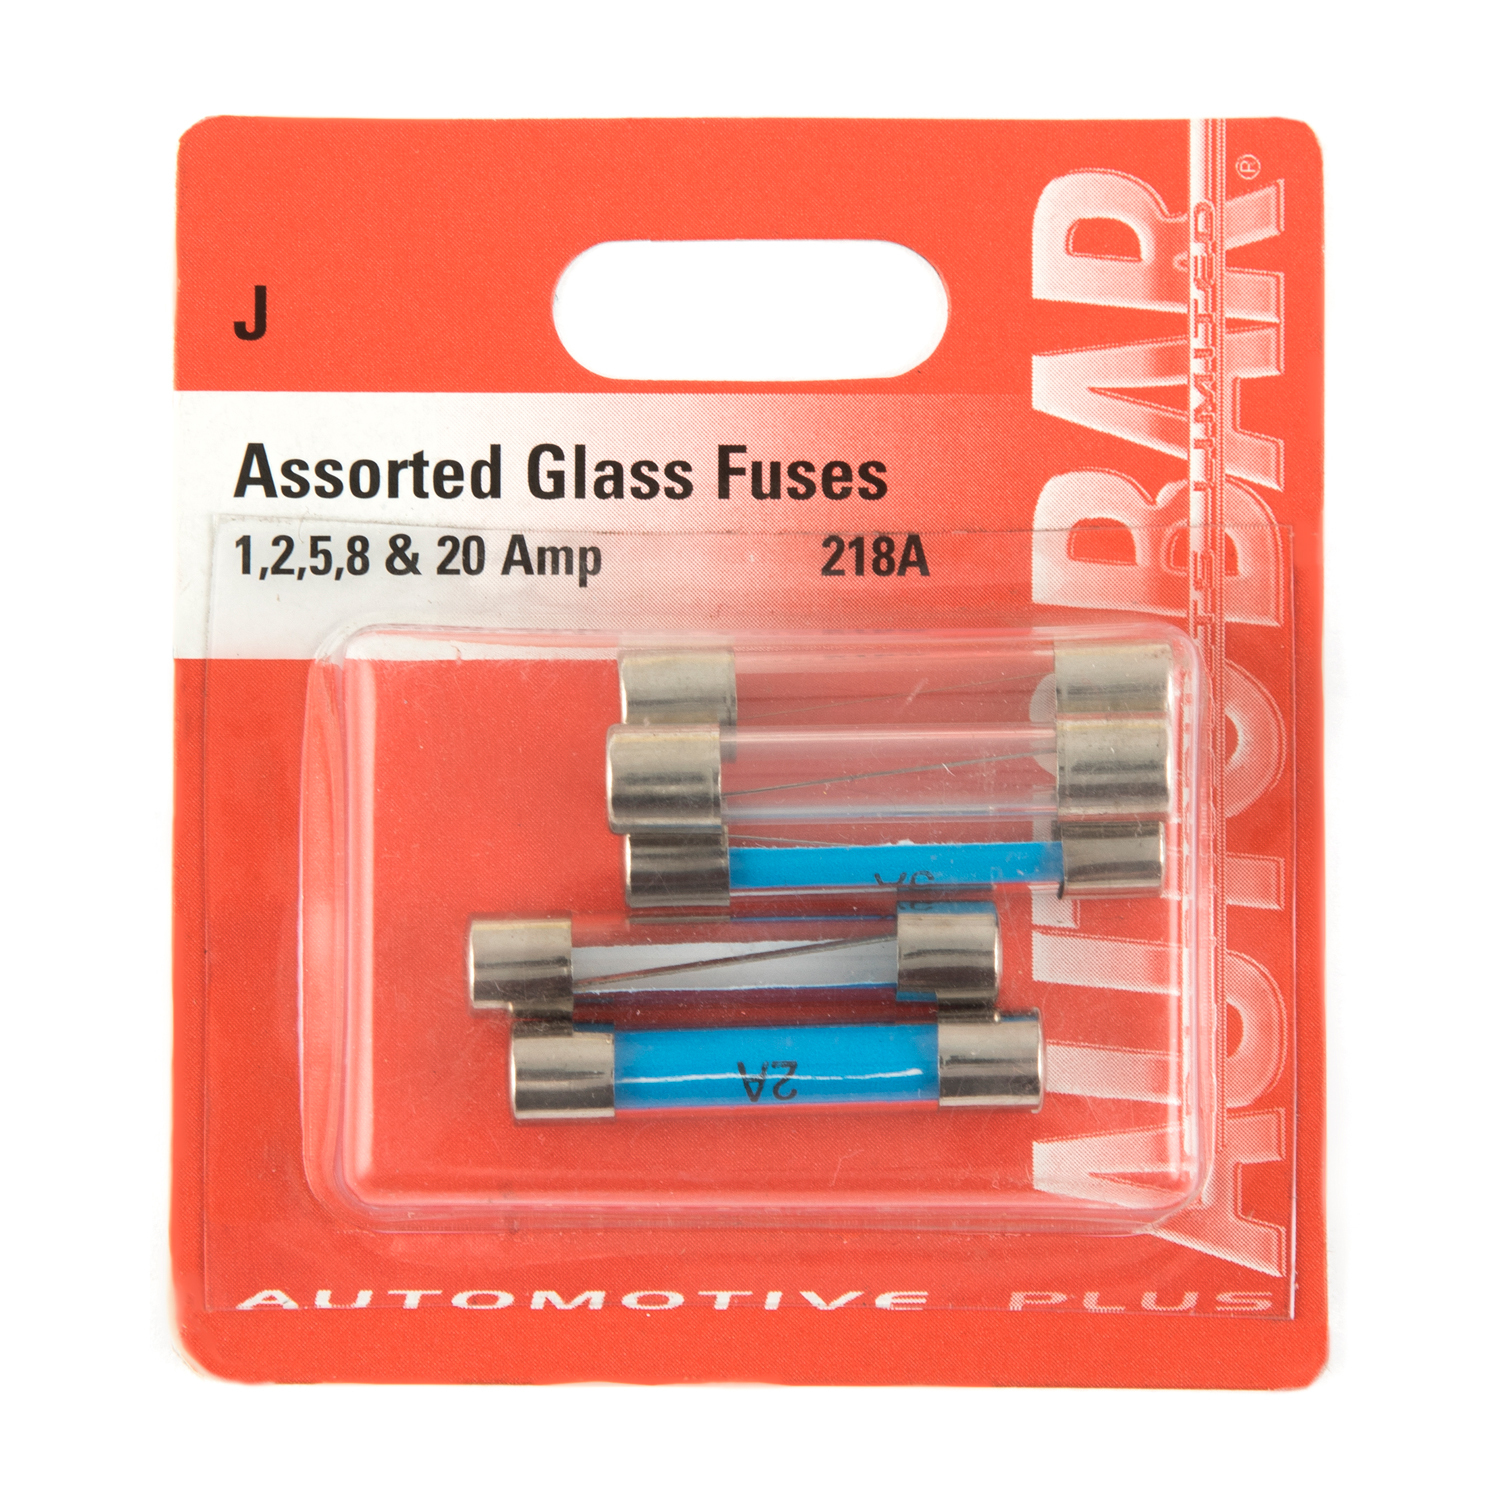 Autobar Assorted Glass Fuses Image